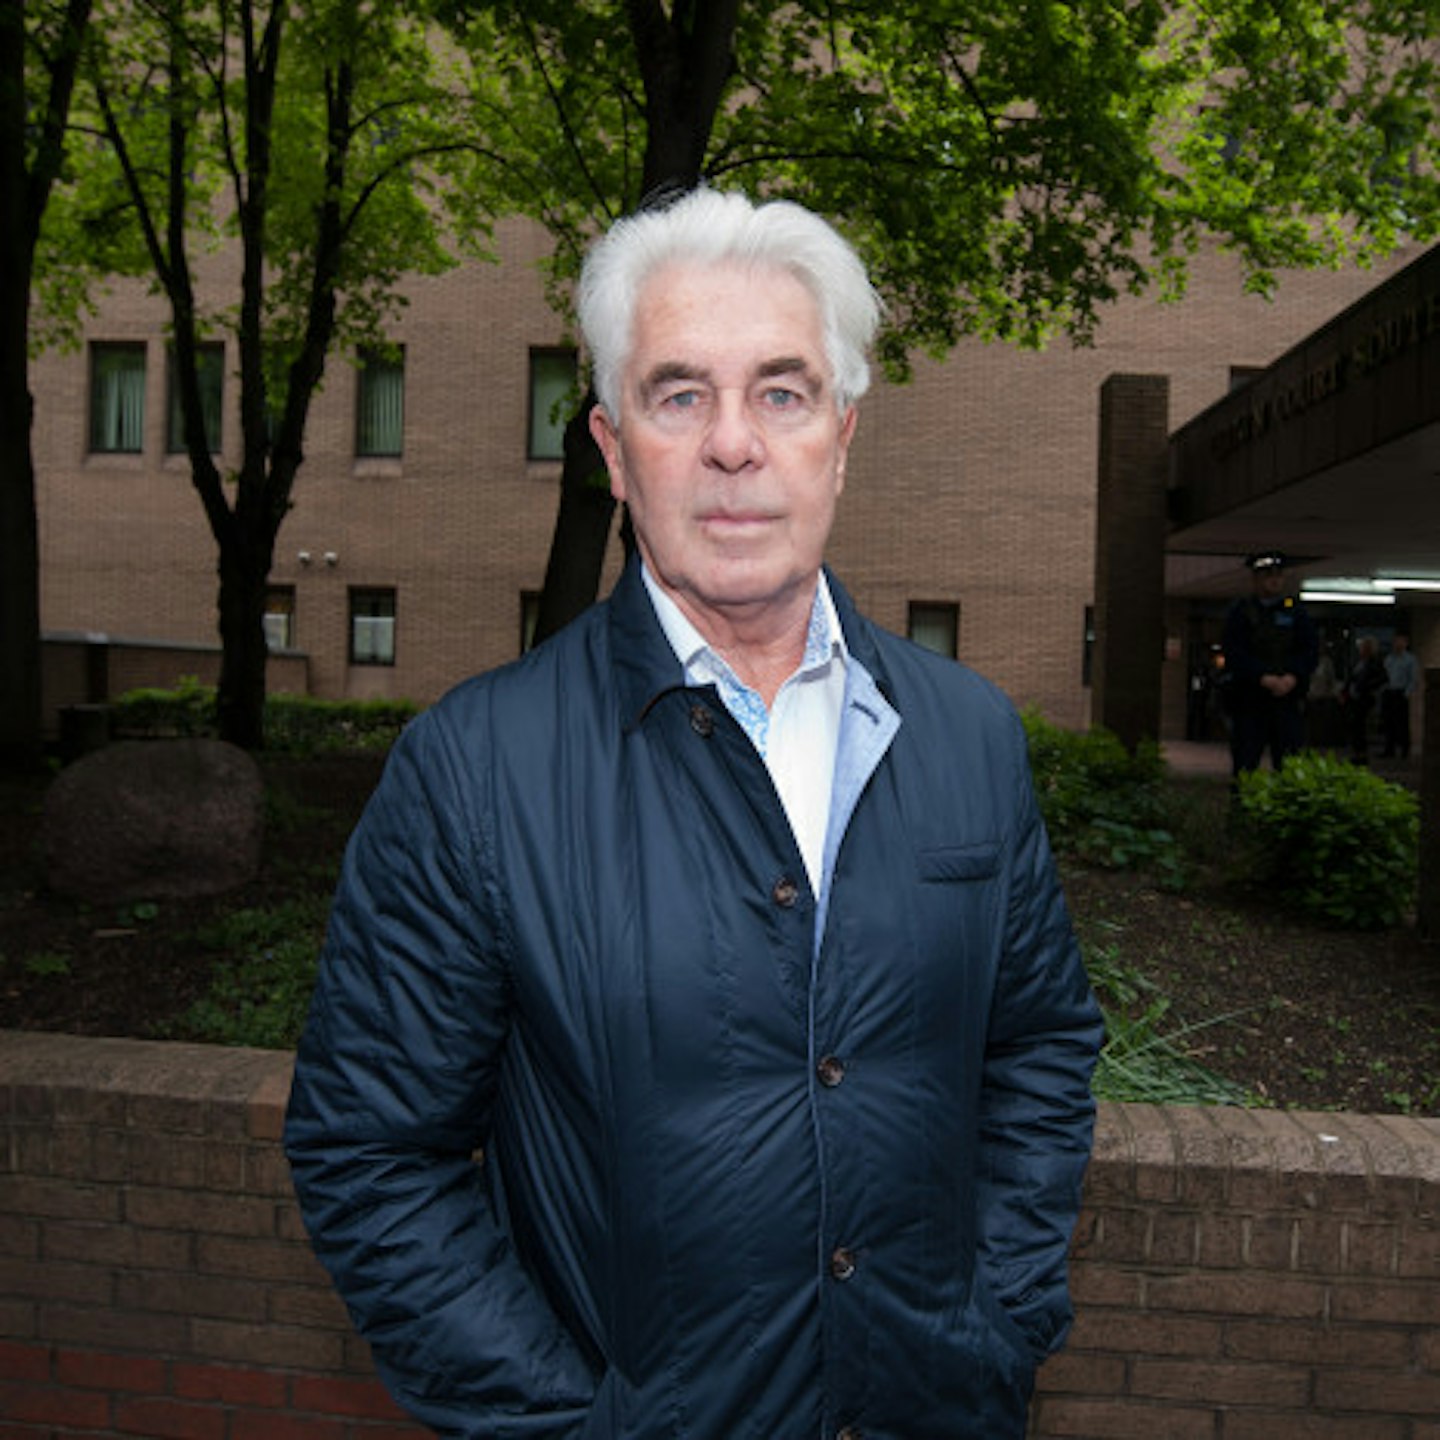 Max Clifford was sentenced to 8 years in prison